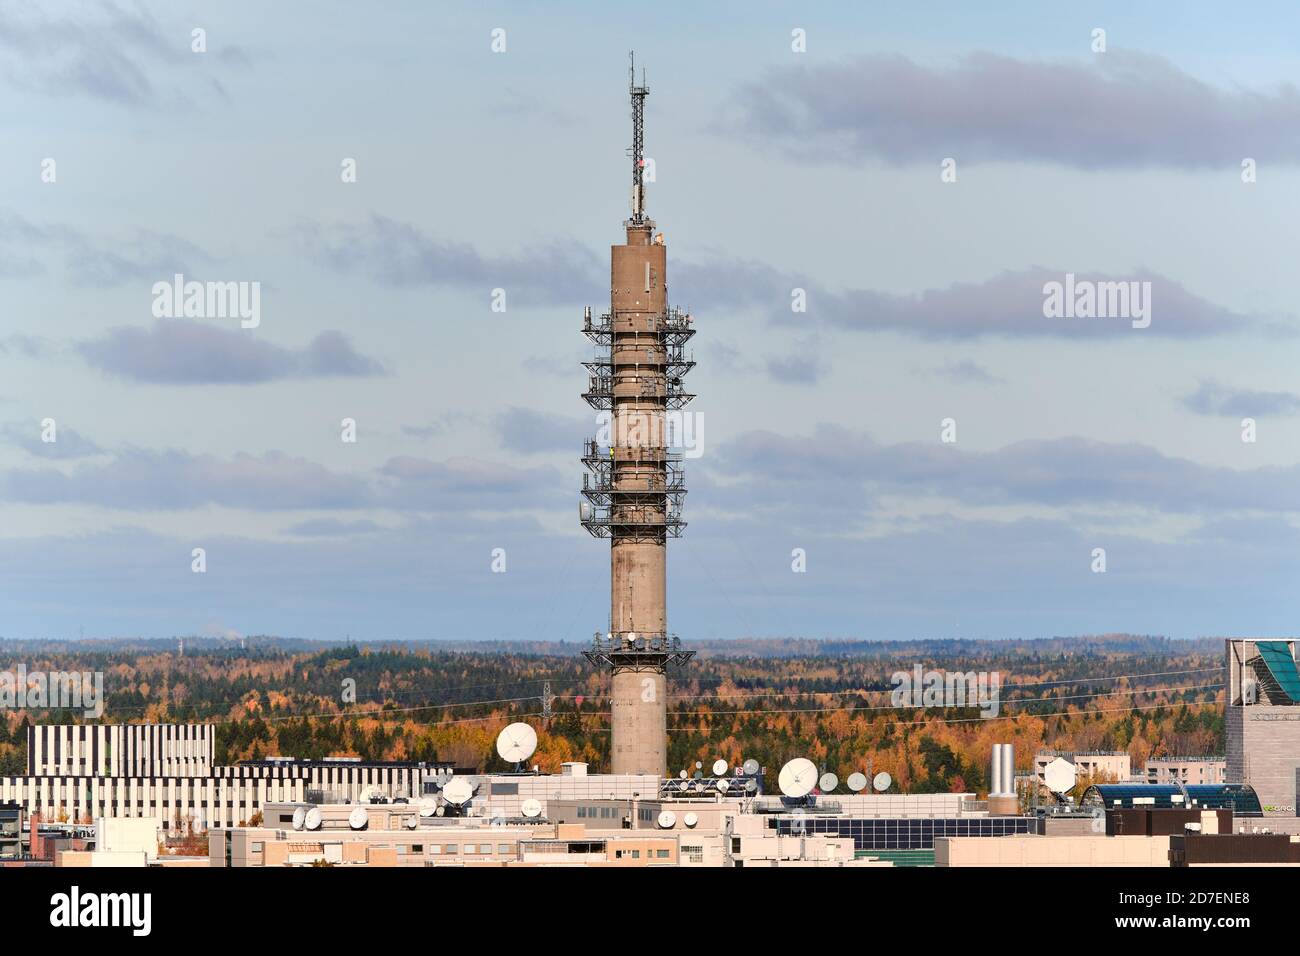 Helsinki, Finland - October 15, 2020: Pasilan linkkitorni, also known as Yle Transmission Tower. Stock Photo